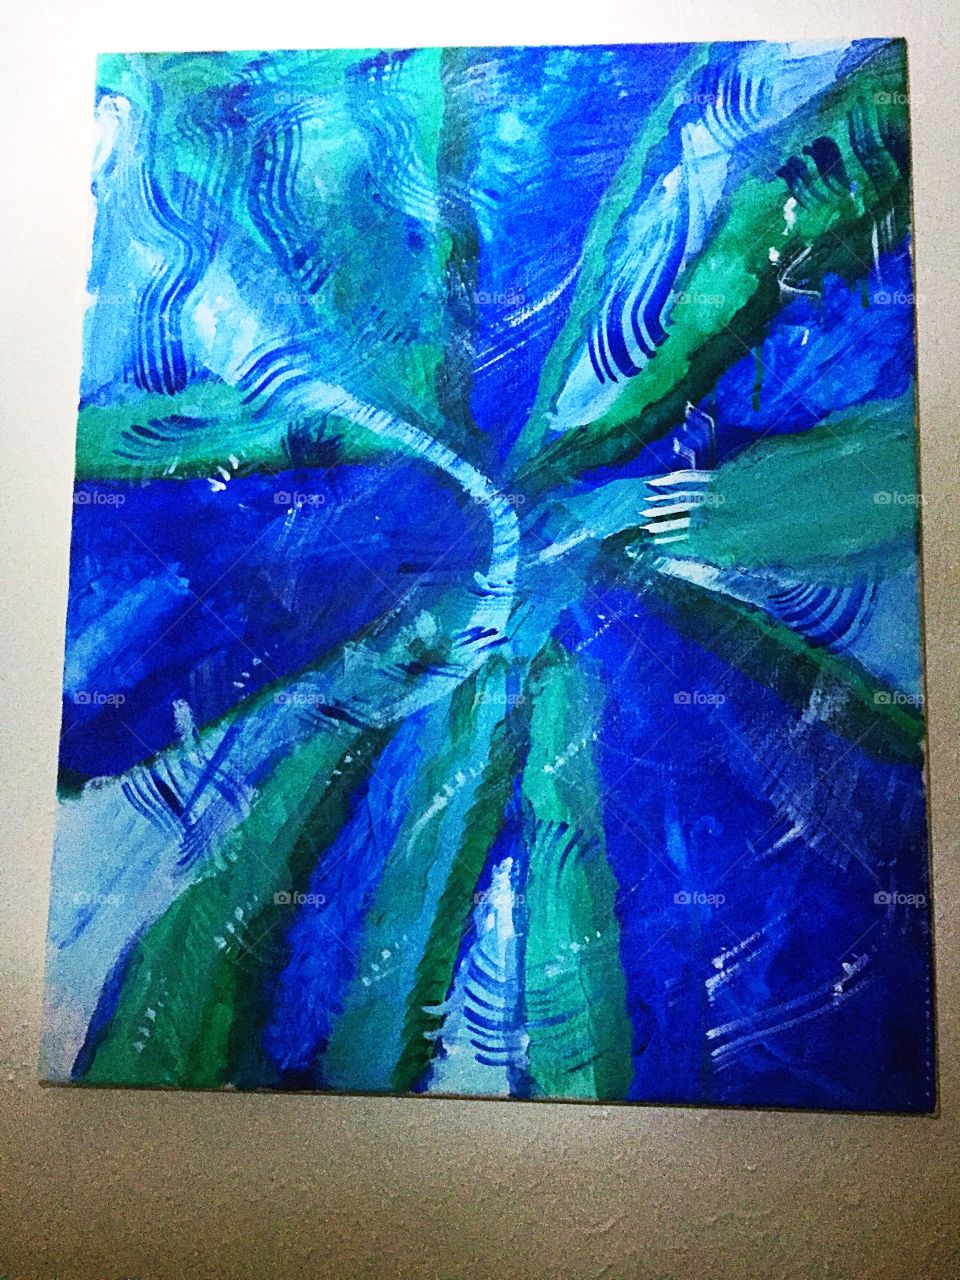 Blue and green abstract art 